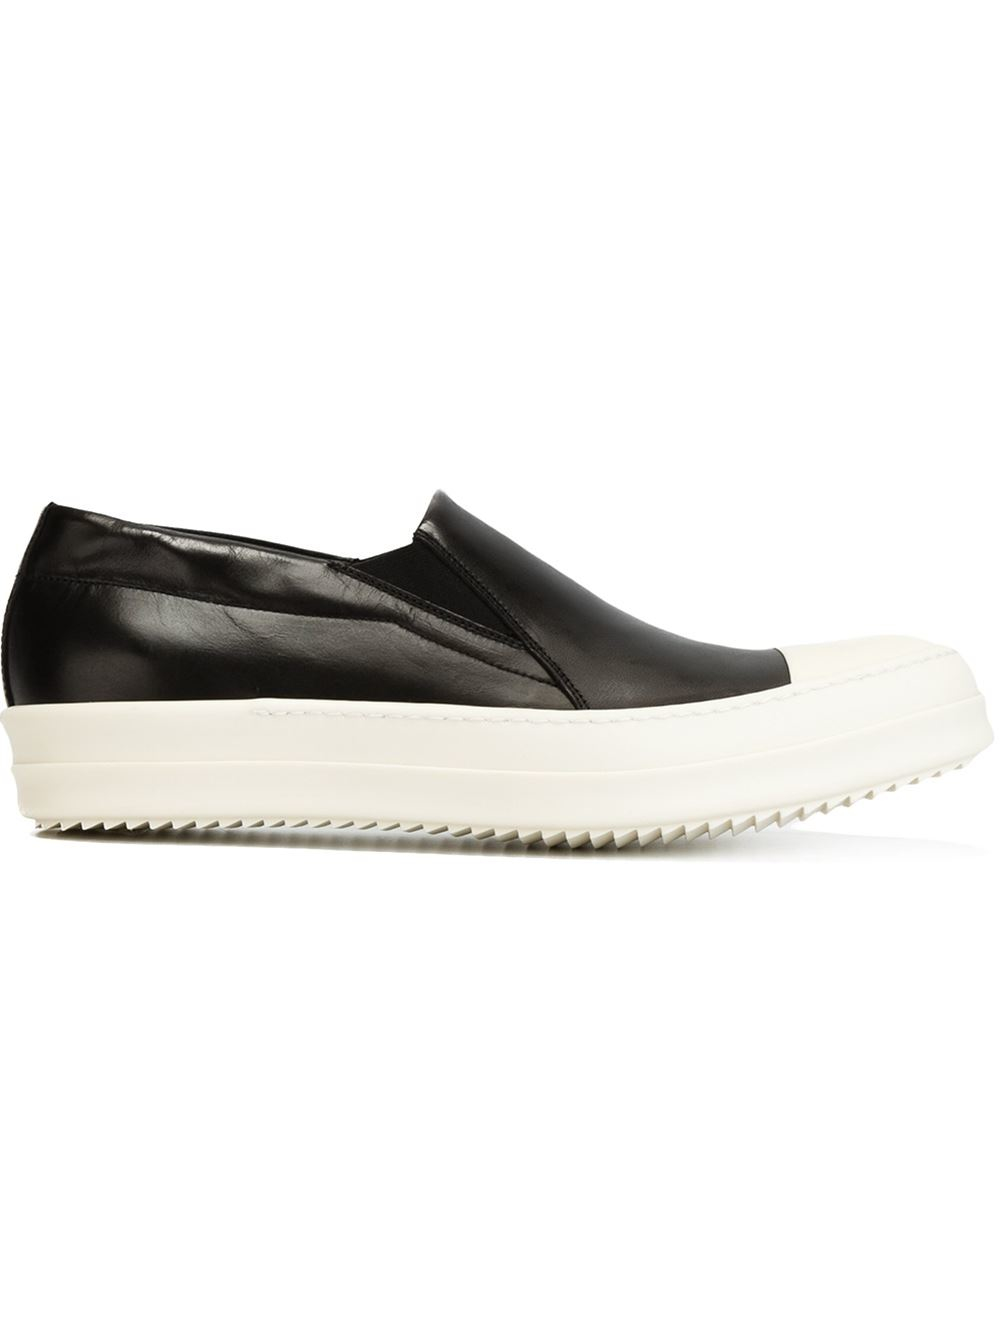 Rick owens Leather Slip-On Sneakers in Black for Men | Lyst